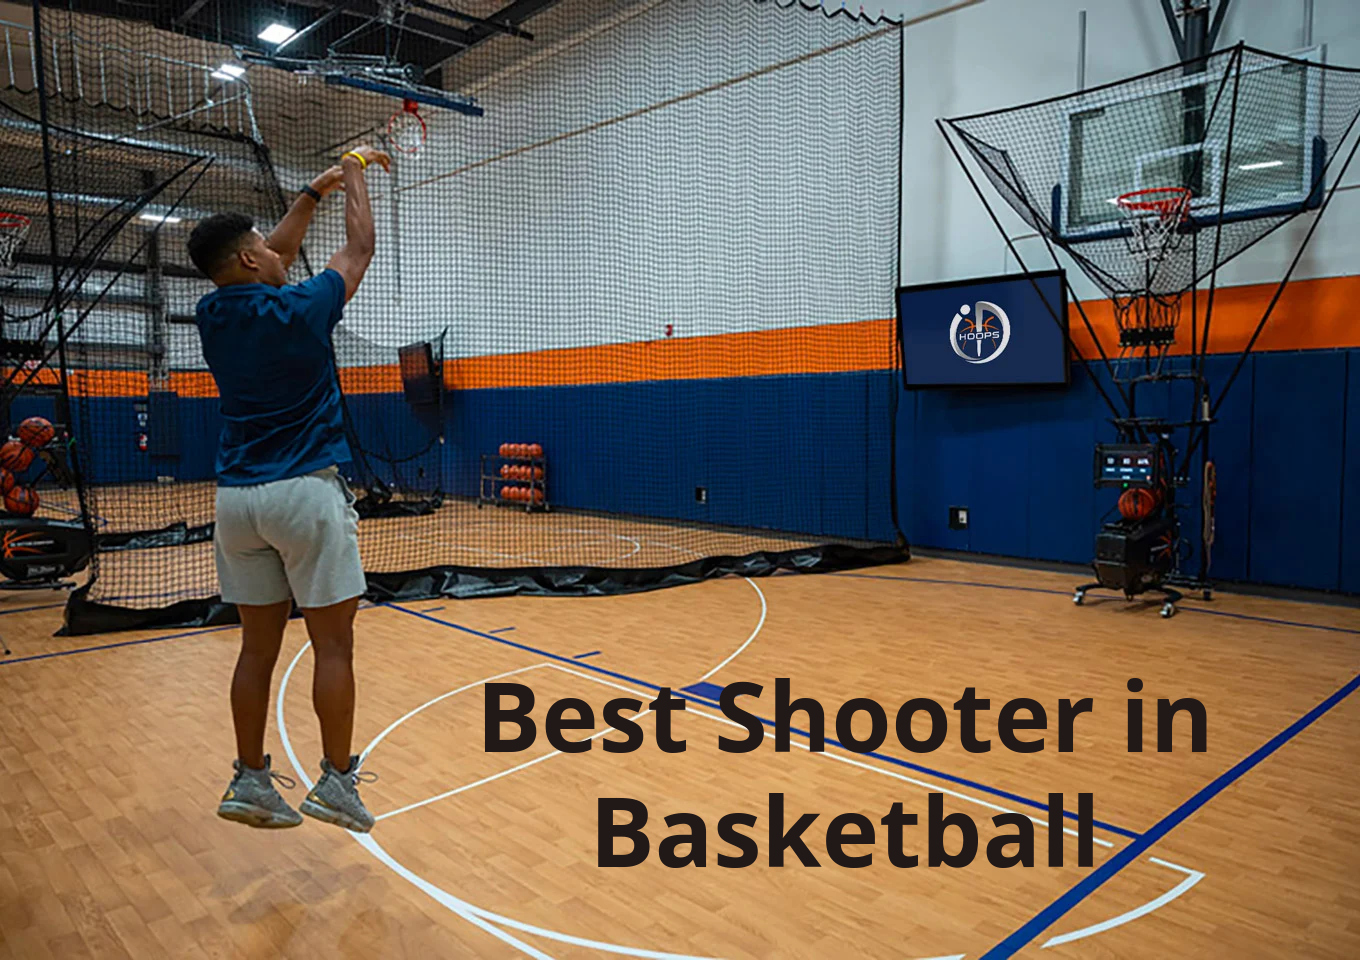 Rebounding Nets vs. Classic Drills: Finding the Perfect Fit for Your Basketball Training